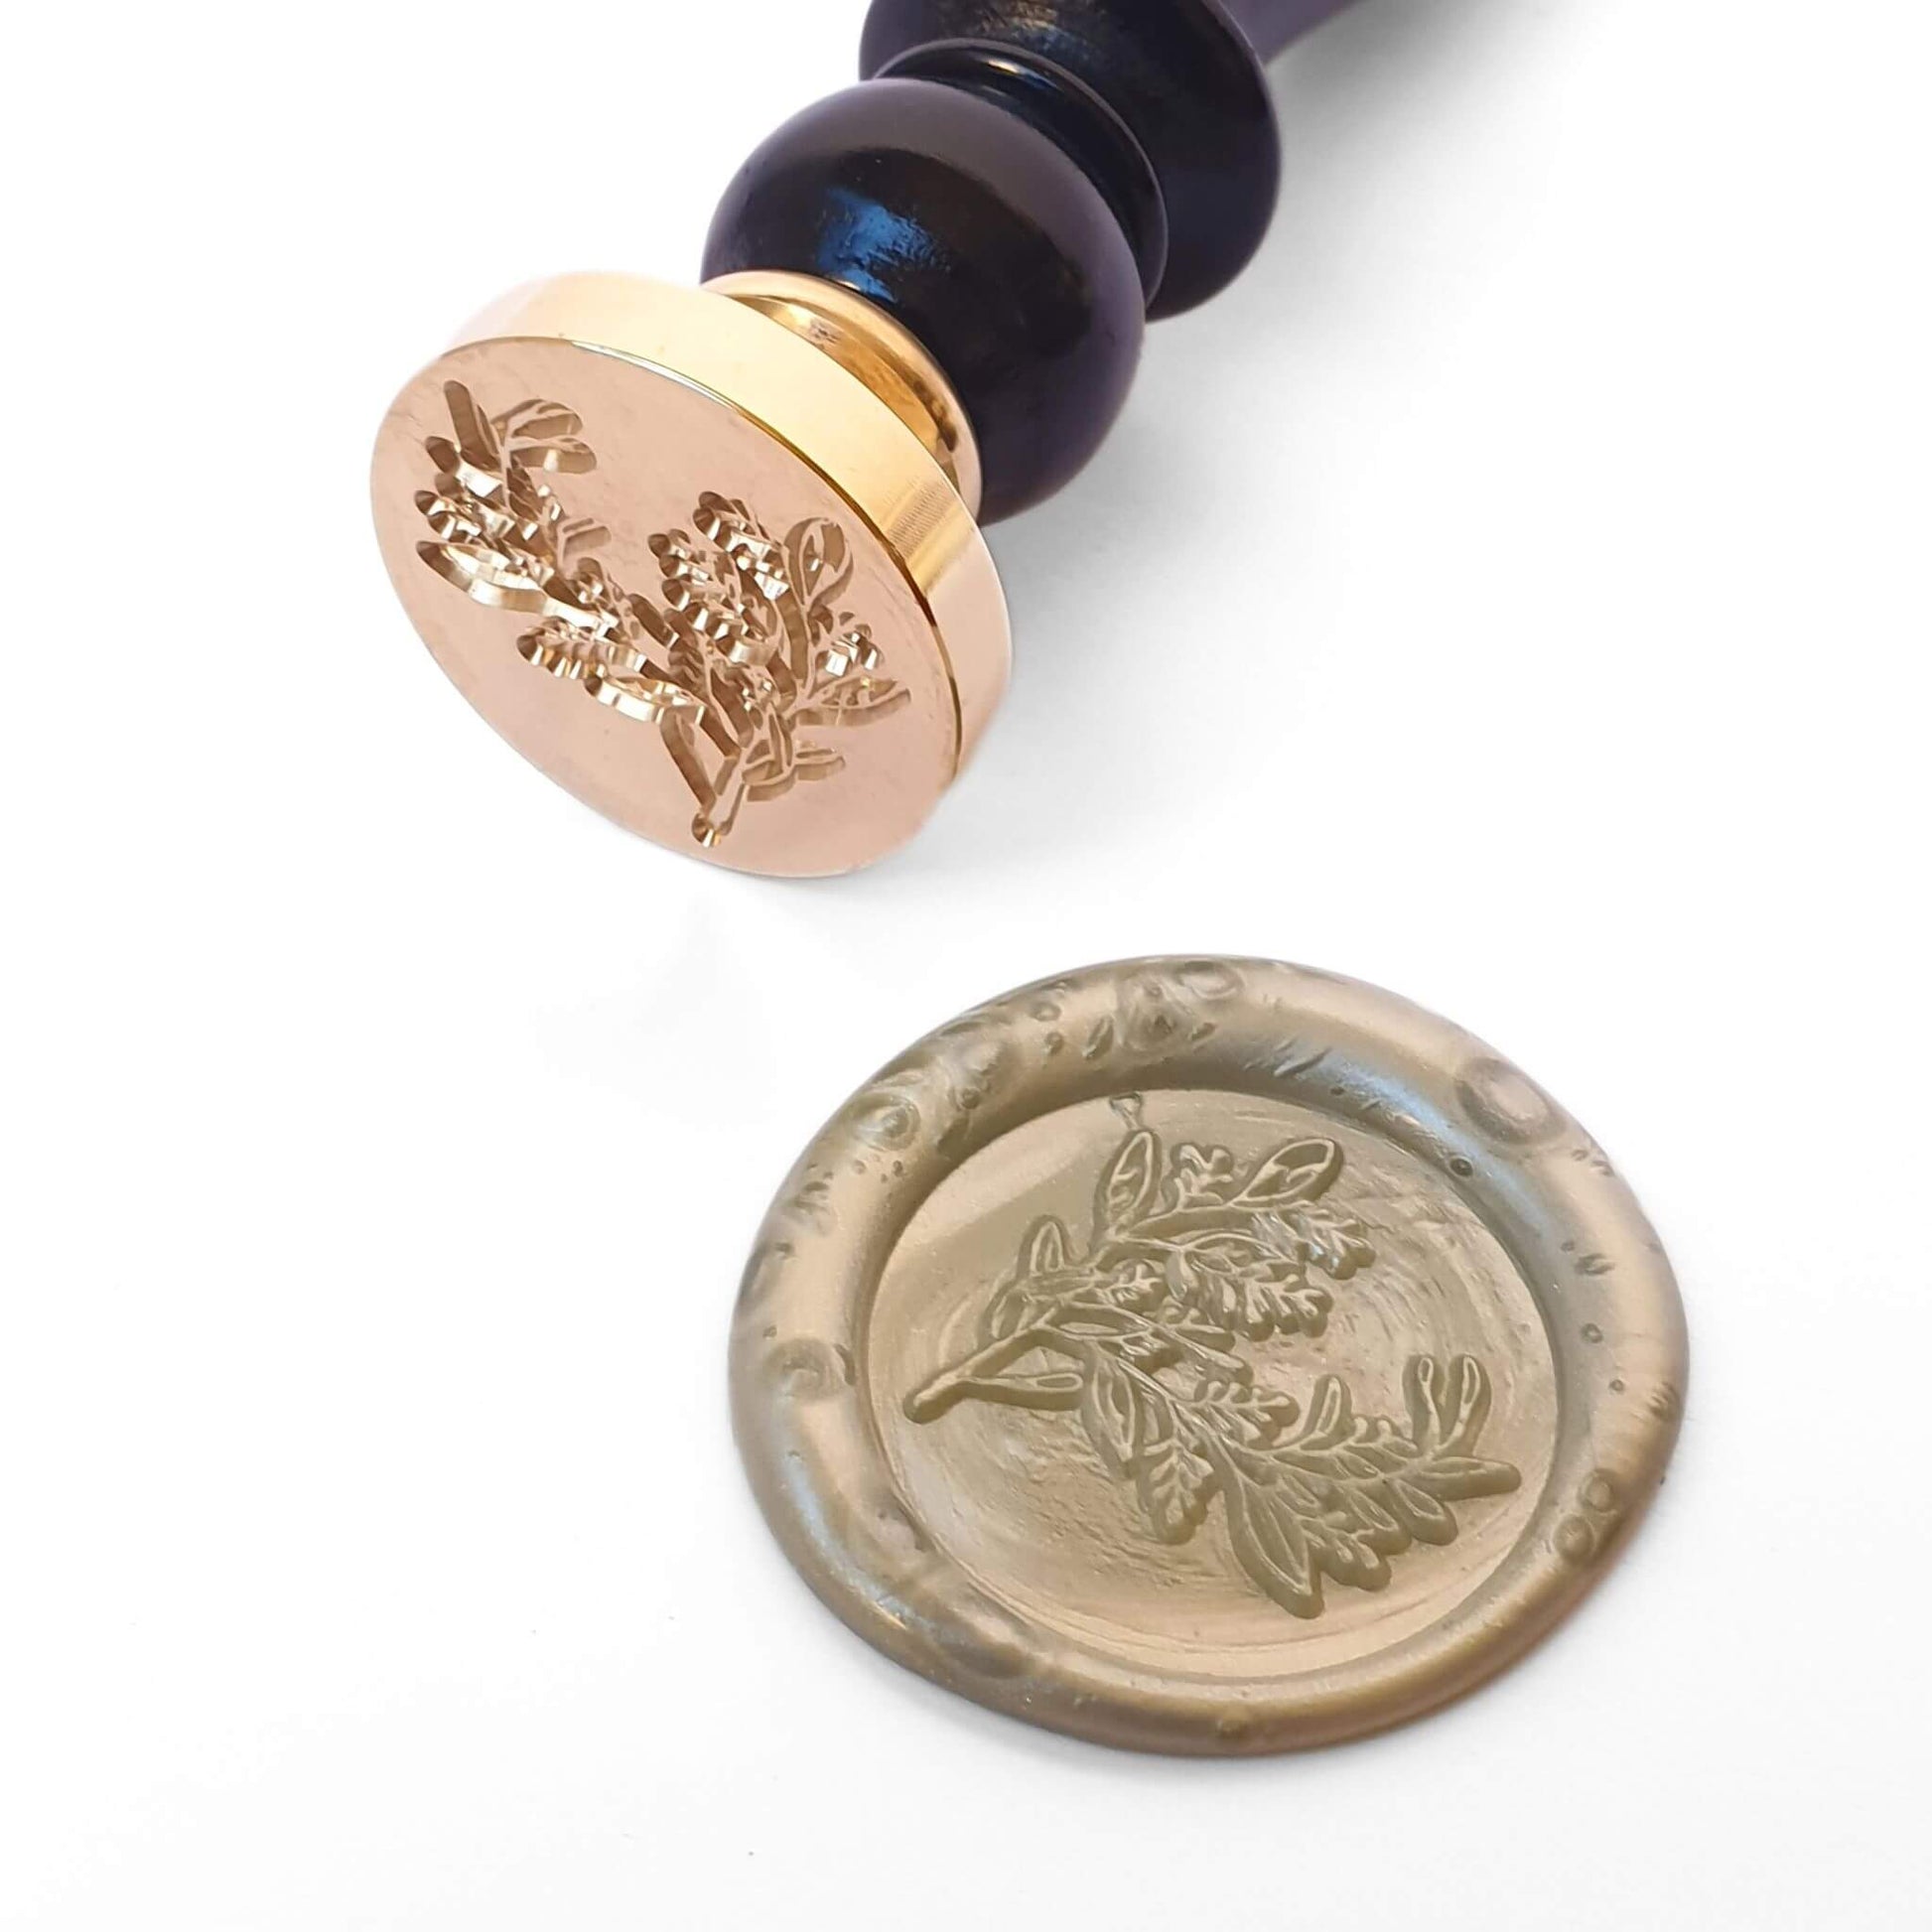 Brass wax seal with black handle and foliage engraving